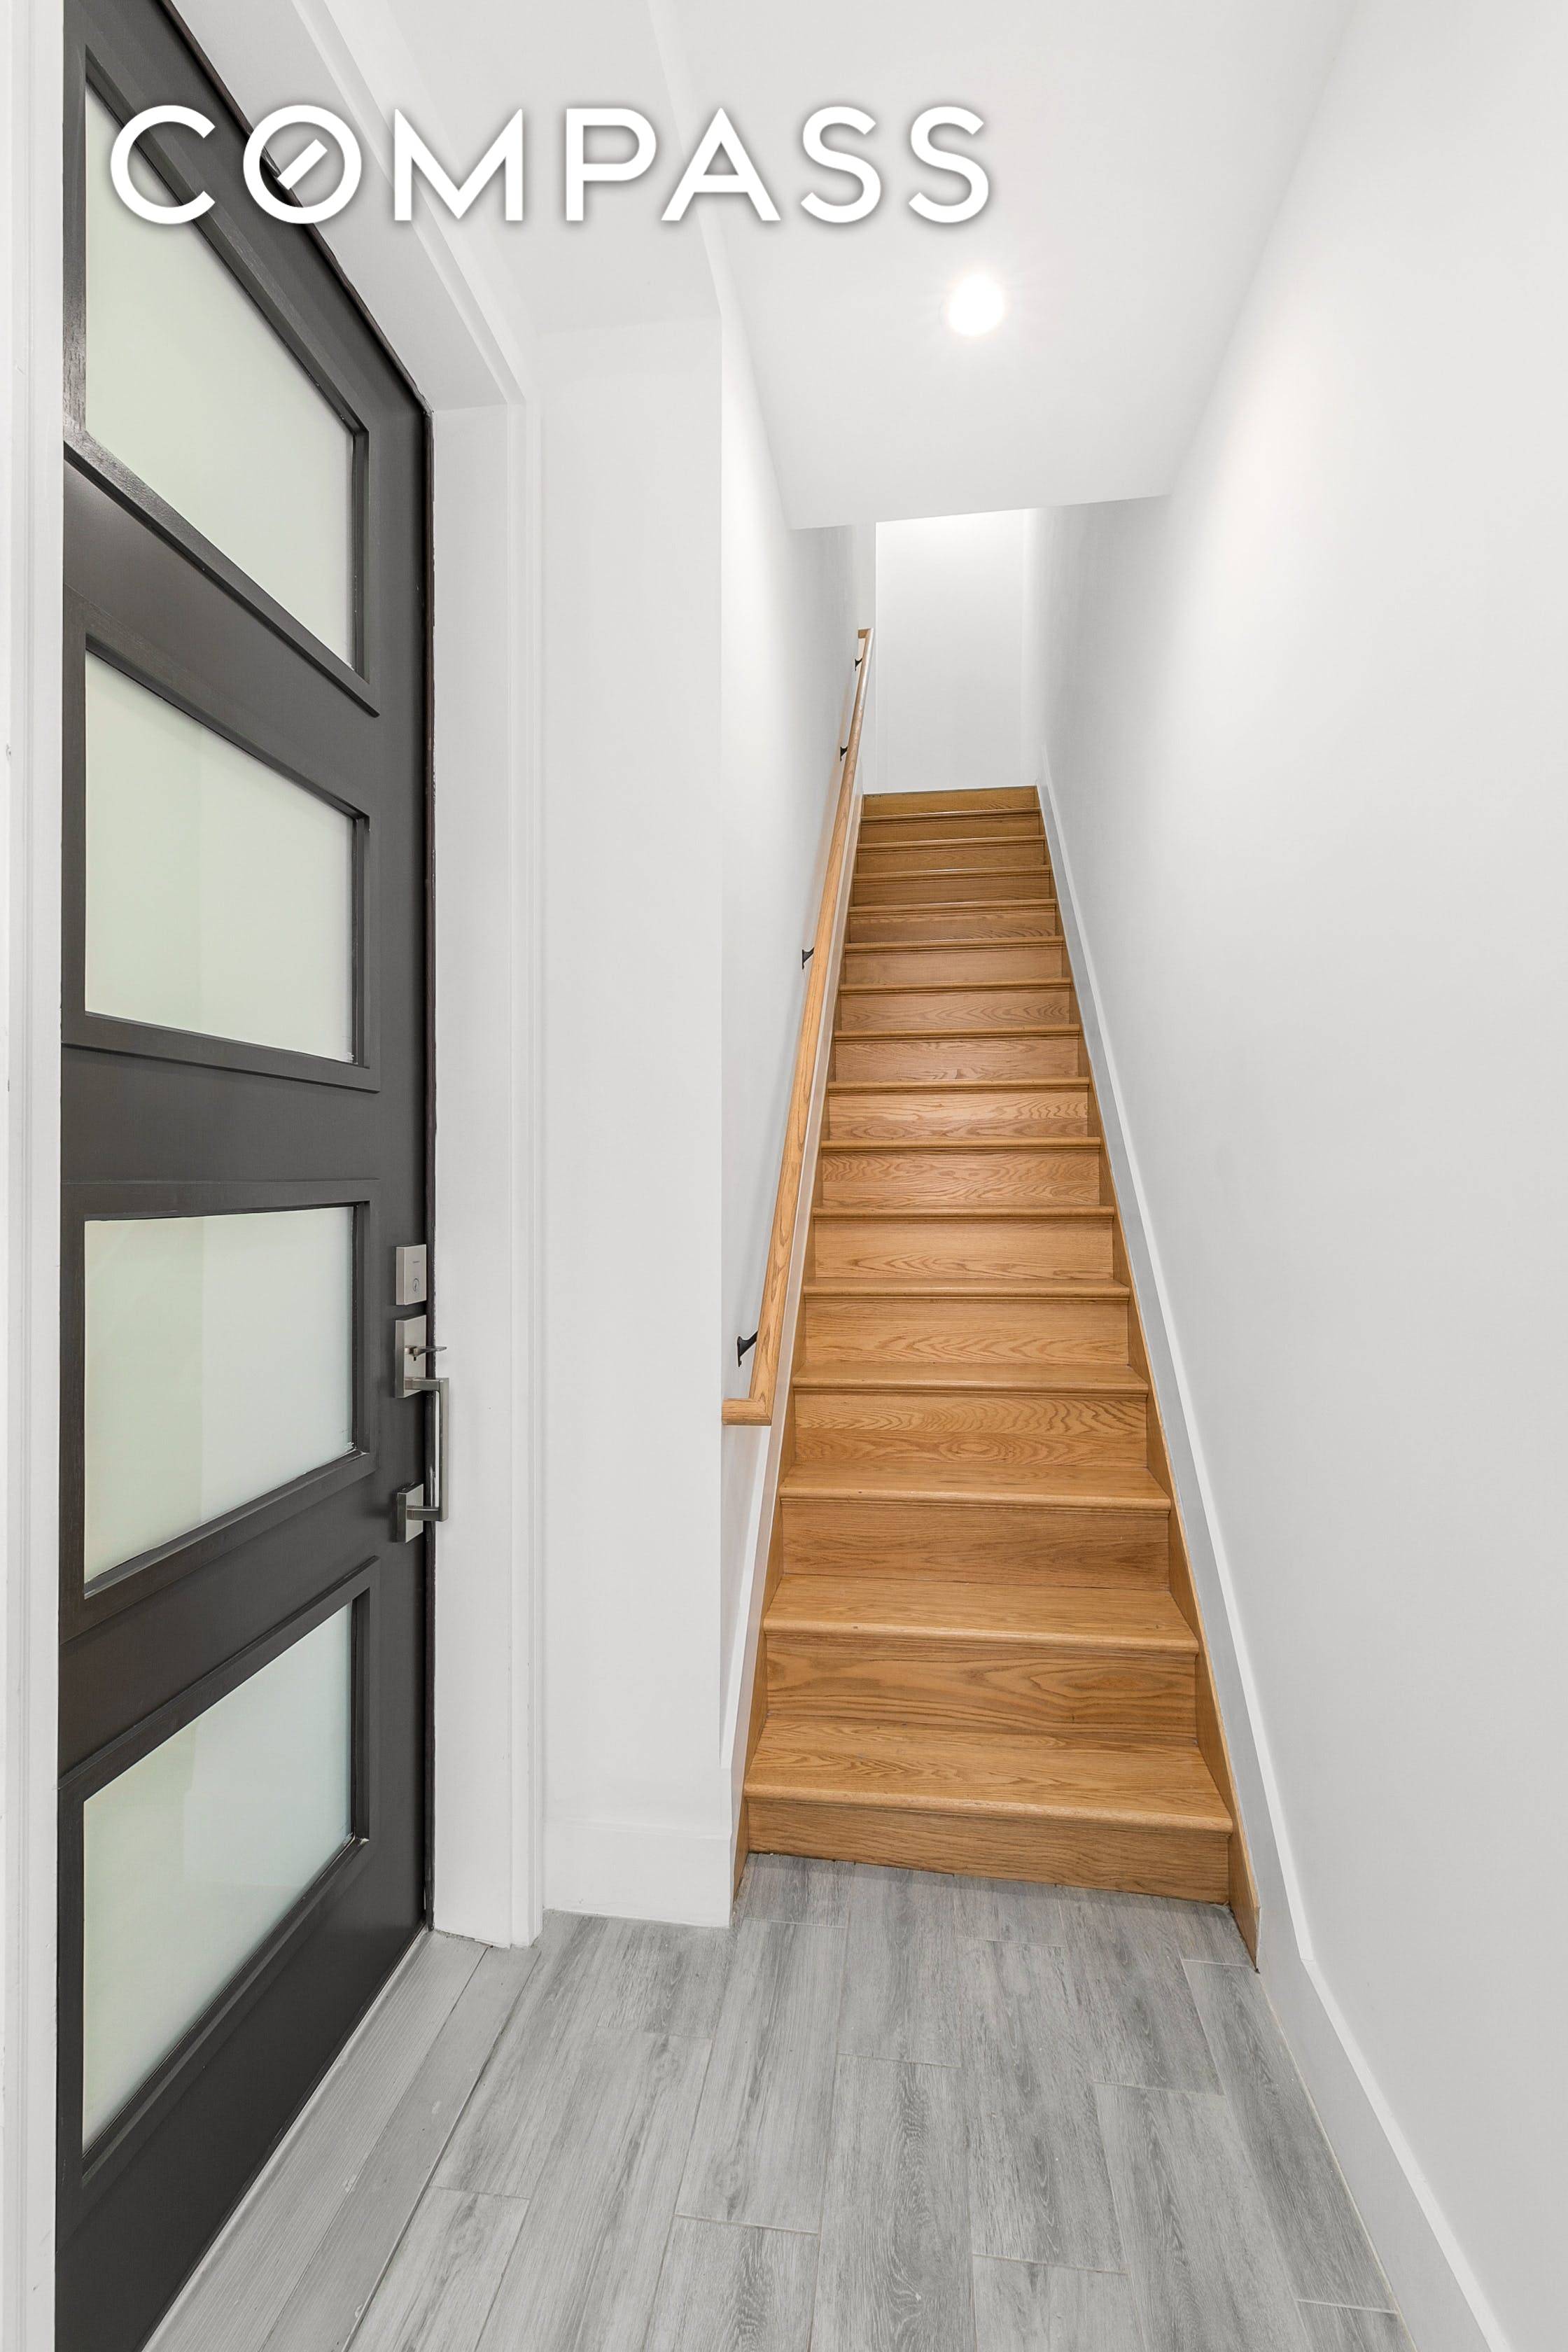 364 Columbia Street is a beautiful mint modern brownstone at the crossroads of Red Hook and Carroll Gardens.